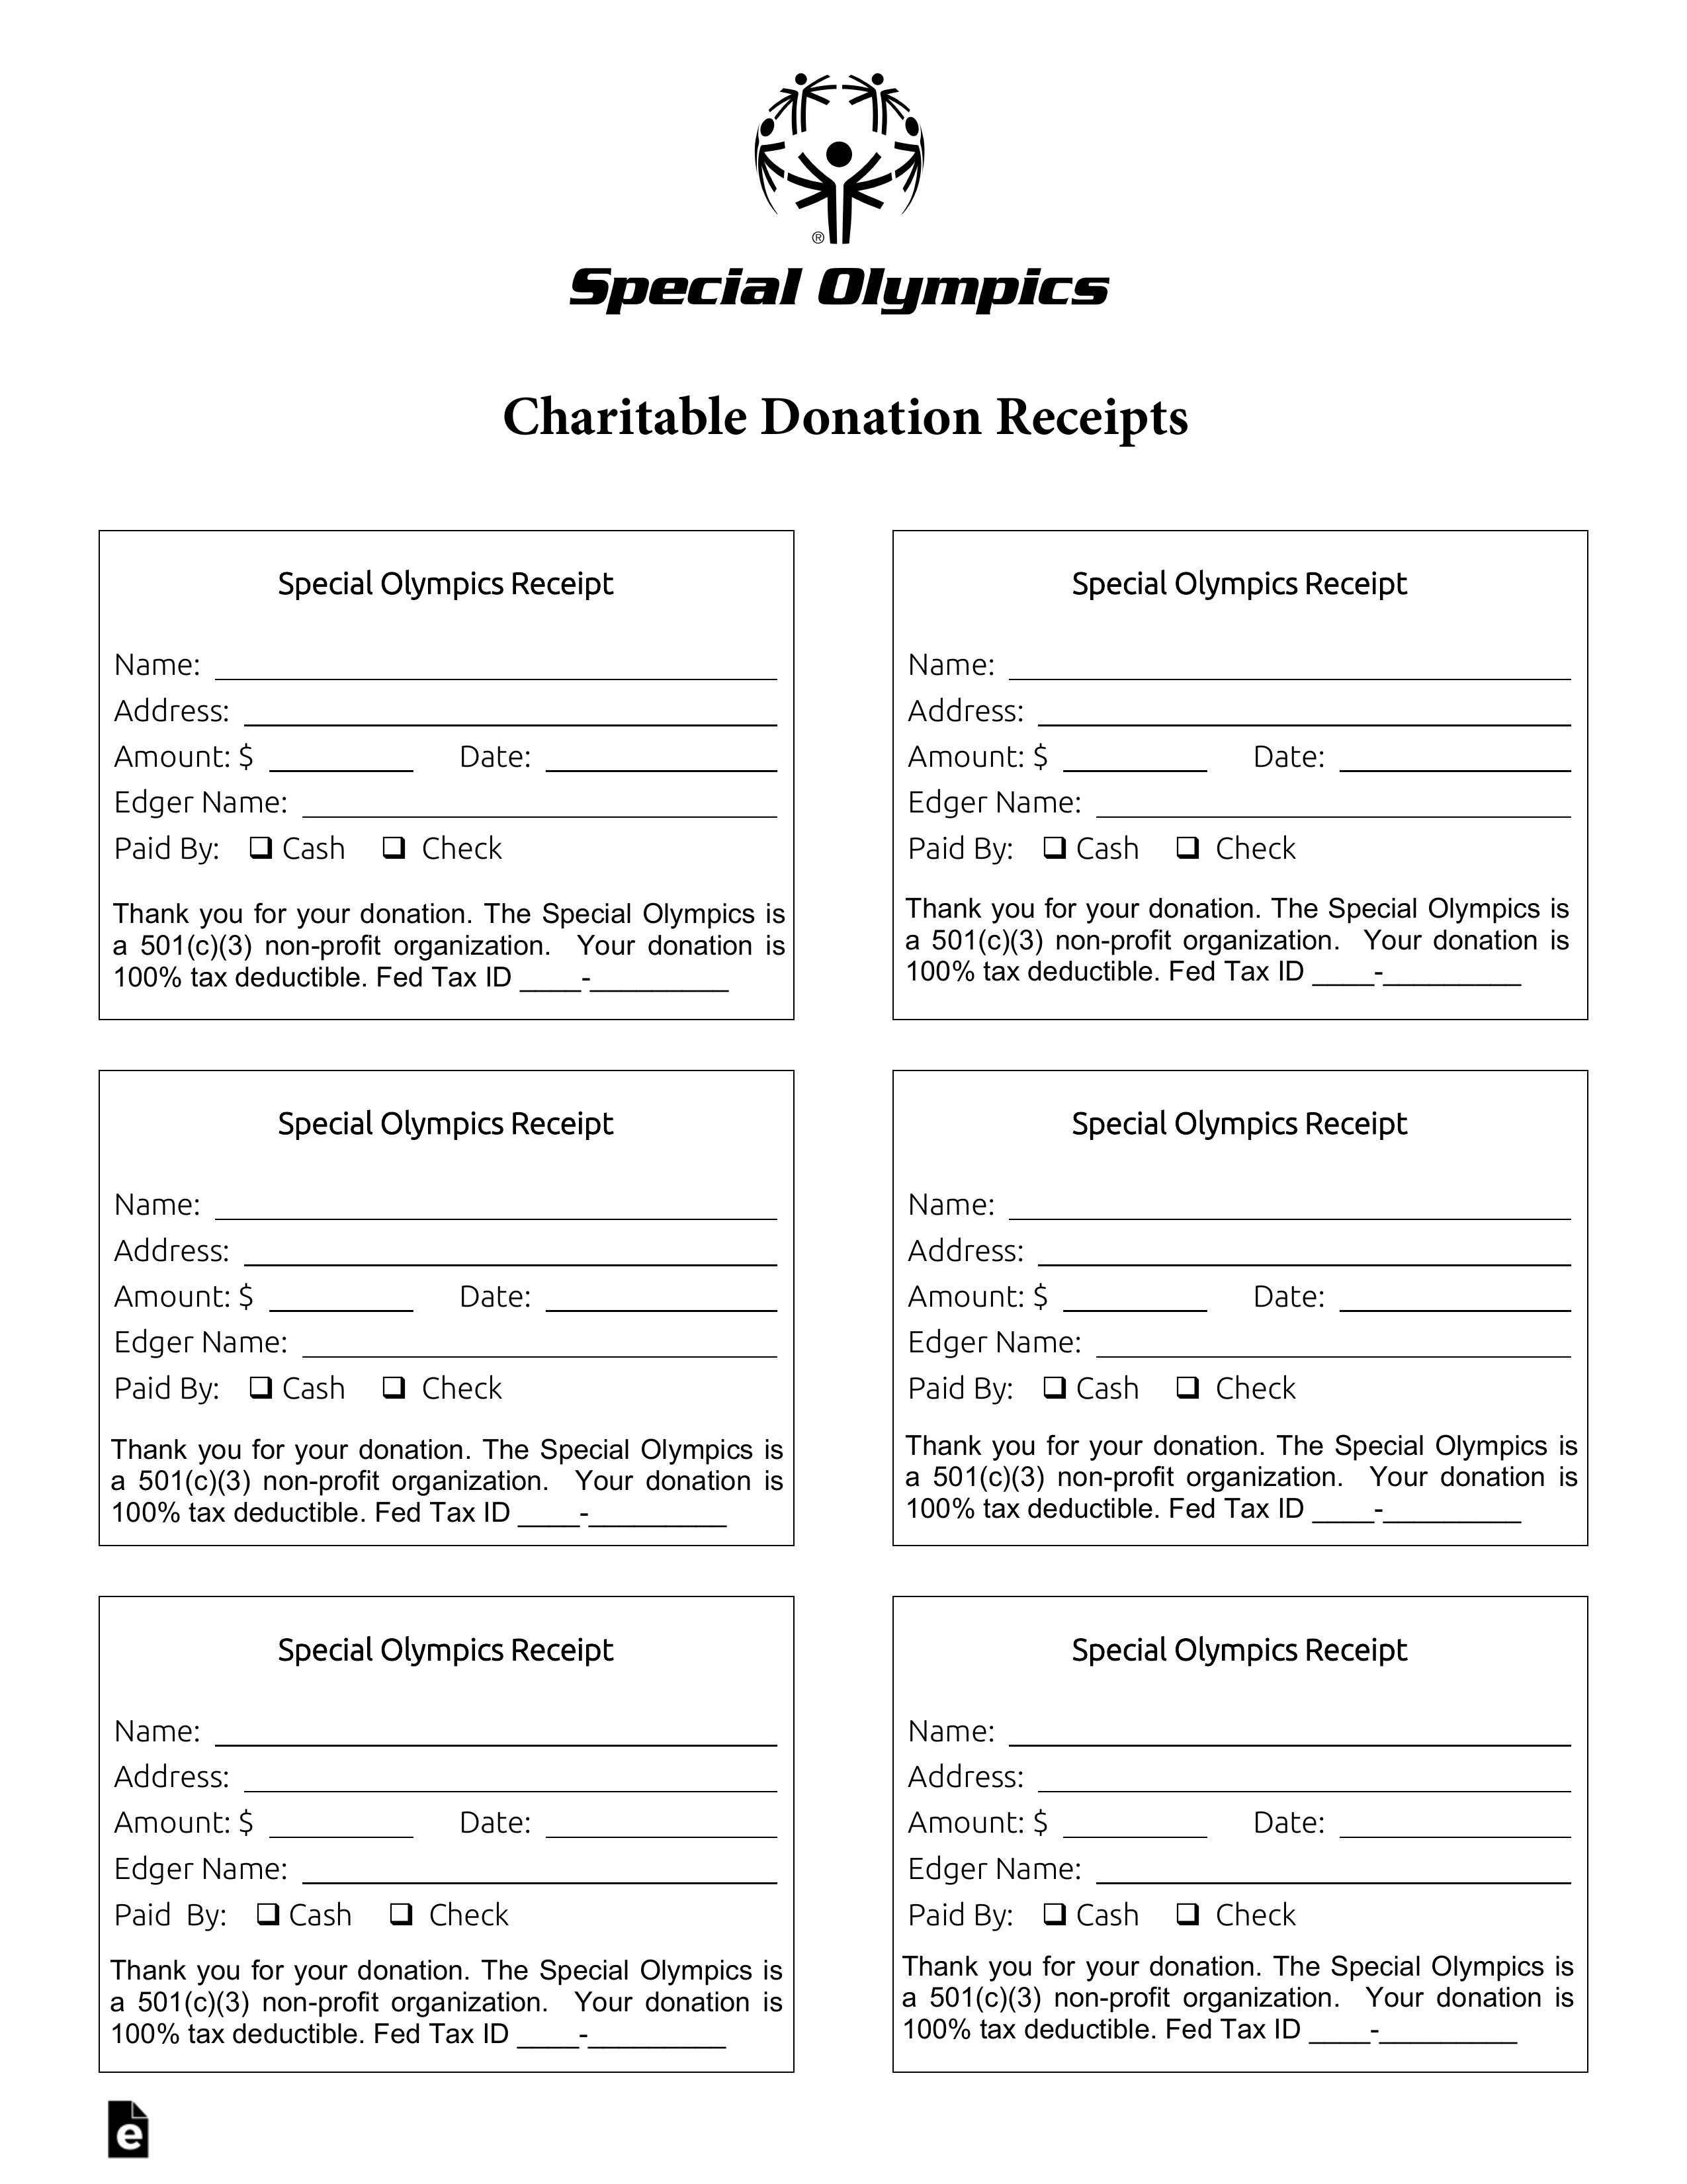 free special olympics donation receipt template pdf eforms